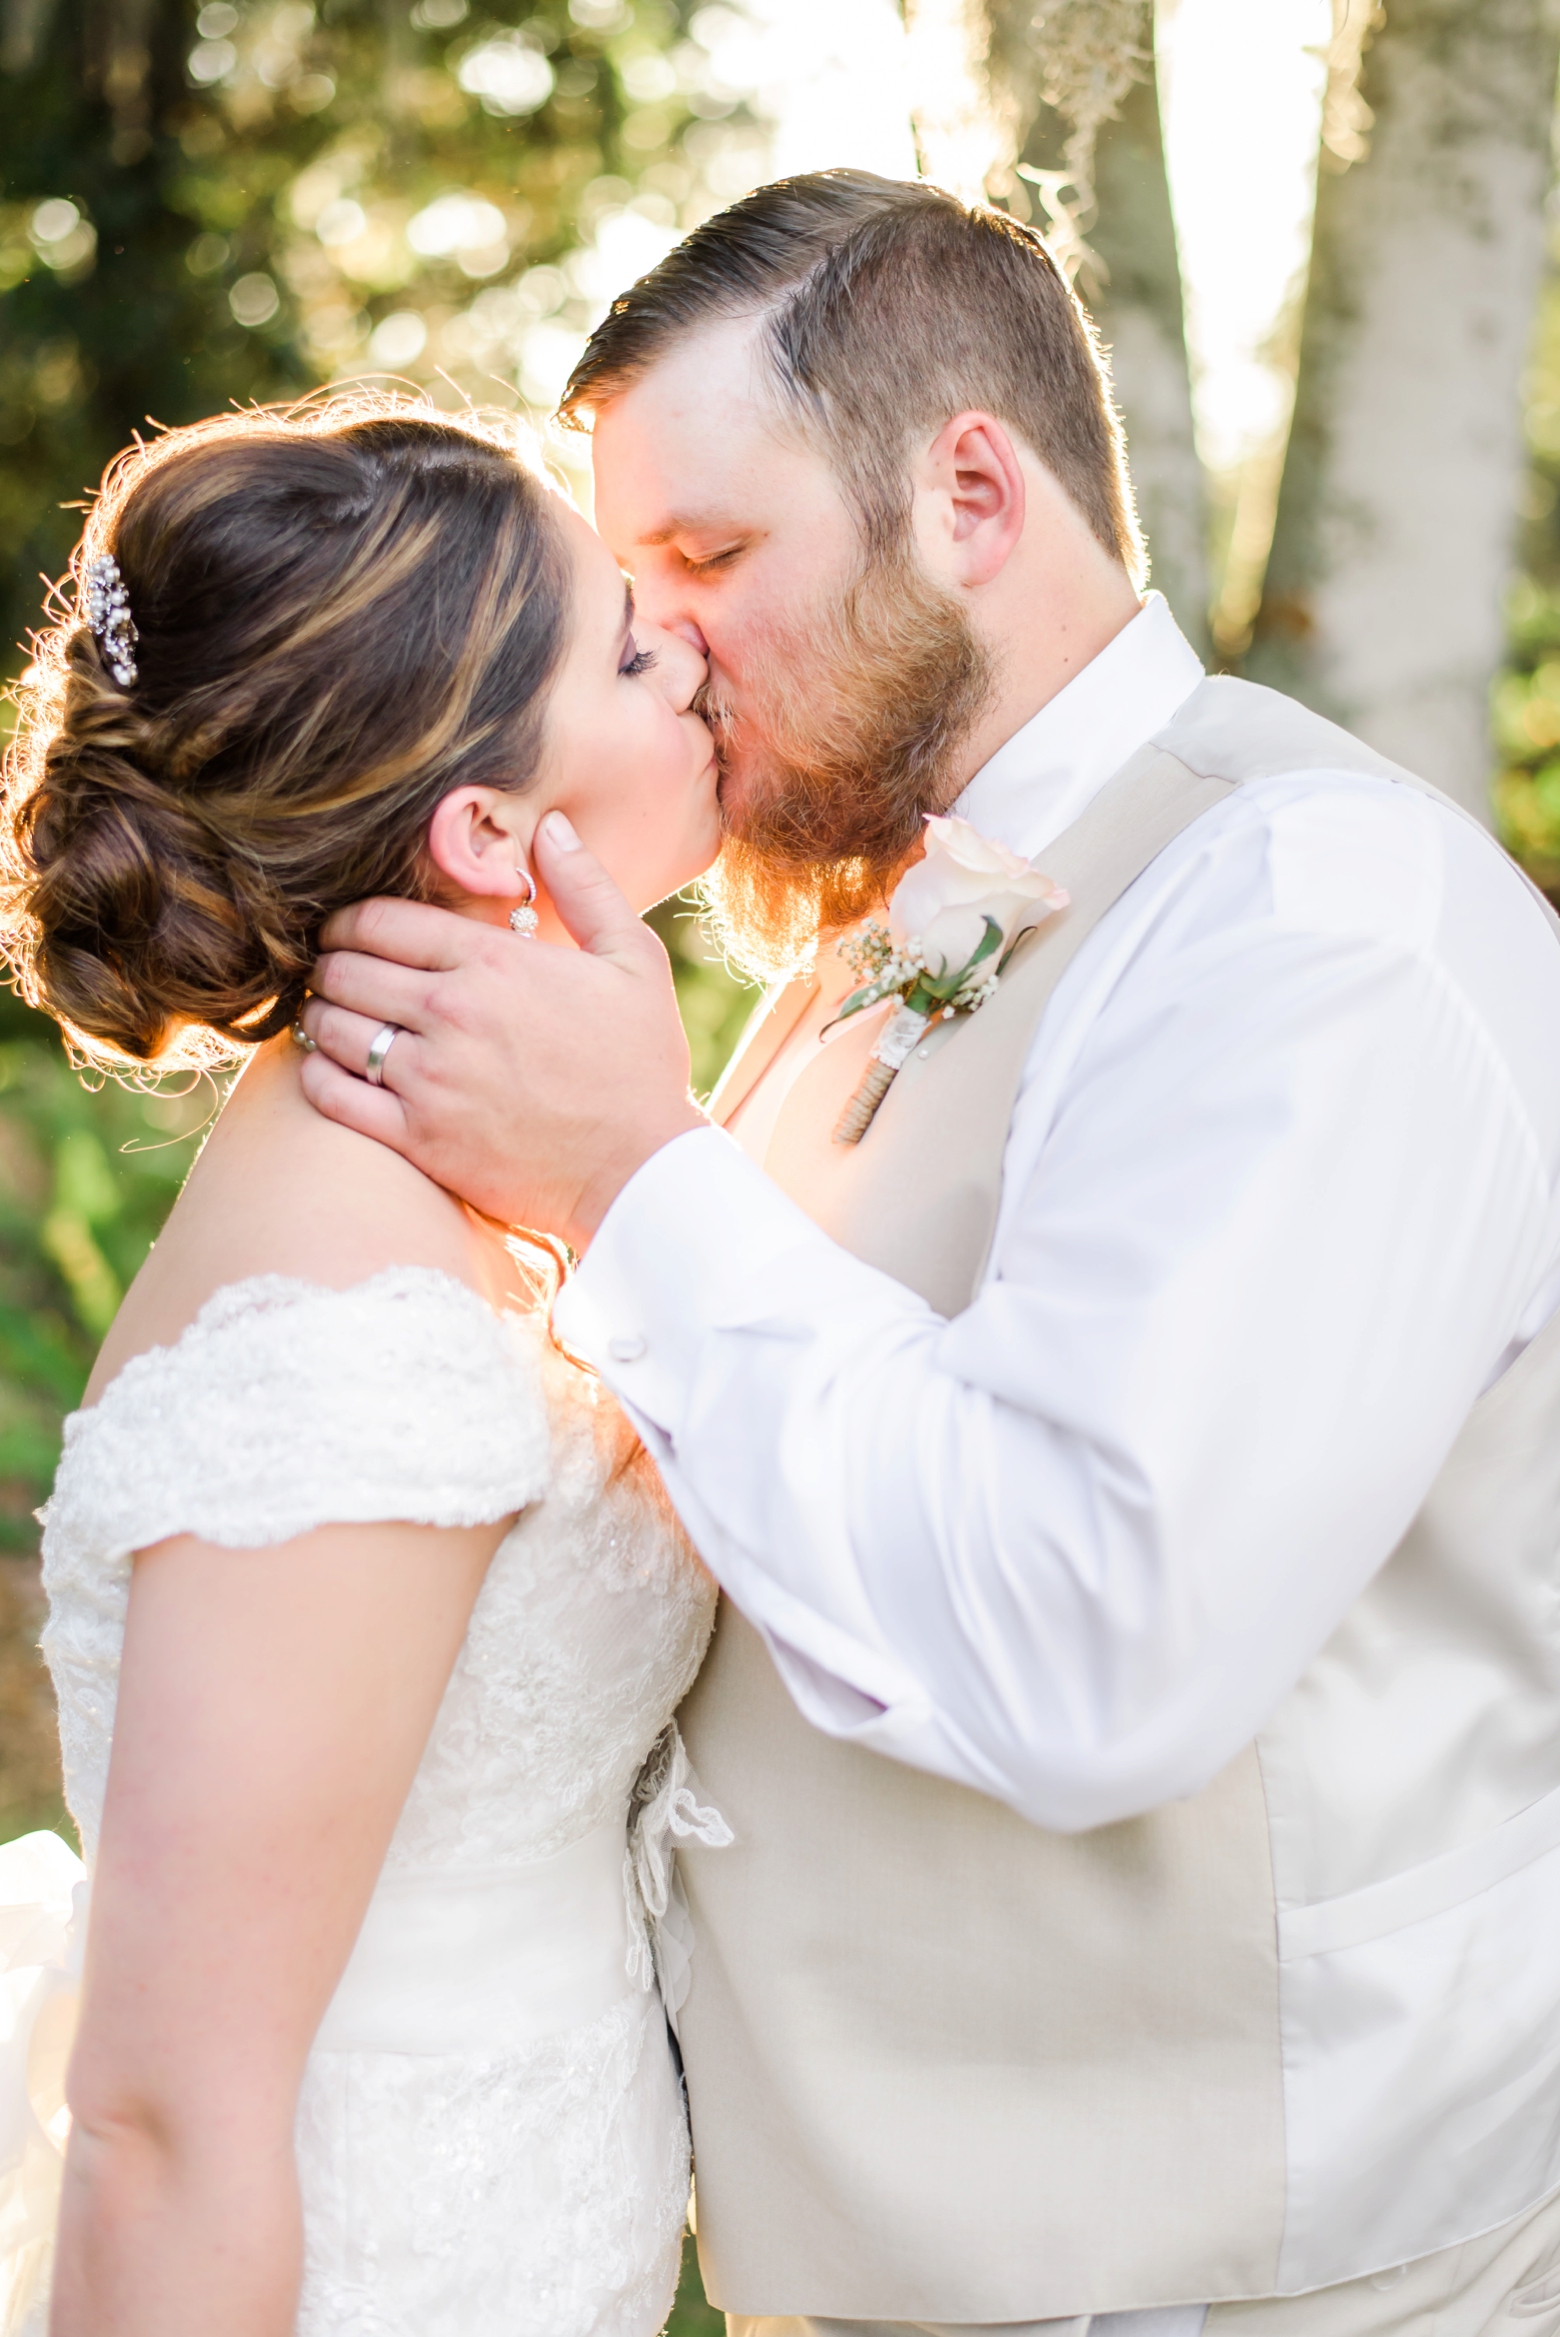 Bride and Groom sharing a kiss in the golden hour of their wedding day in Florida